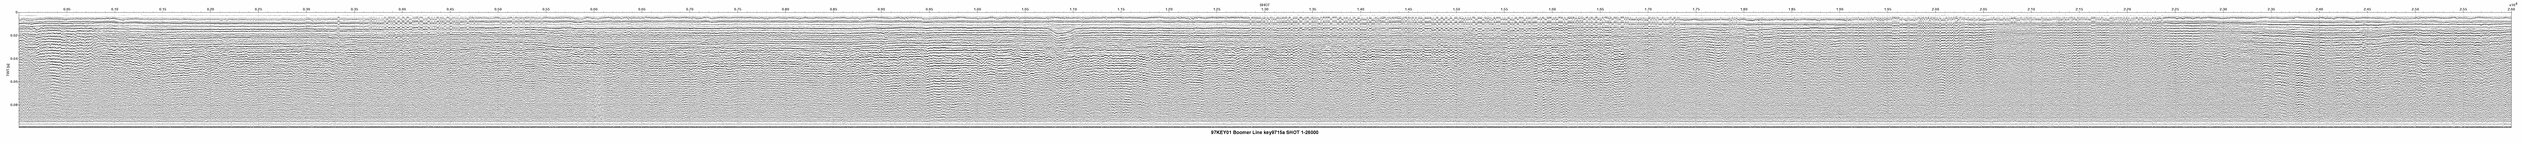 Thumbnail GIF image of the seismic trackline key9715a, with a hotlink to the more detailed, larger JPG image.